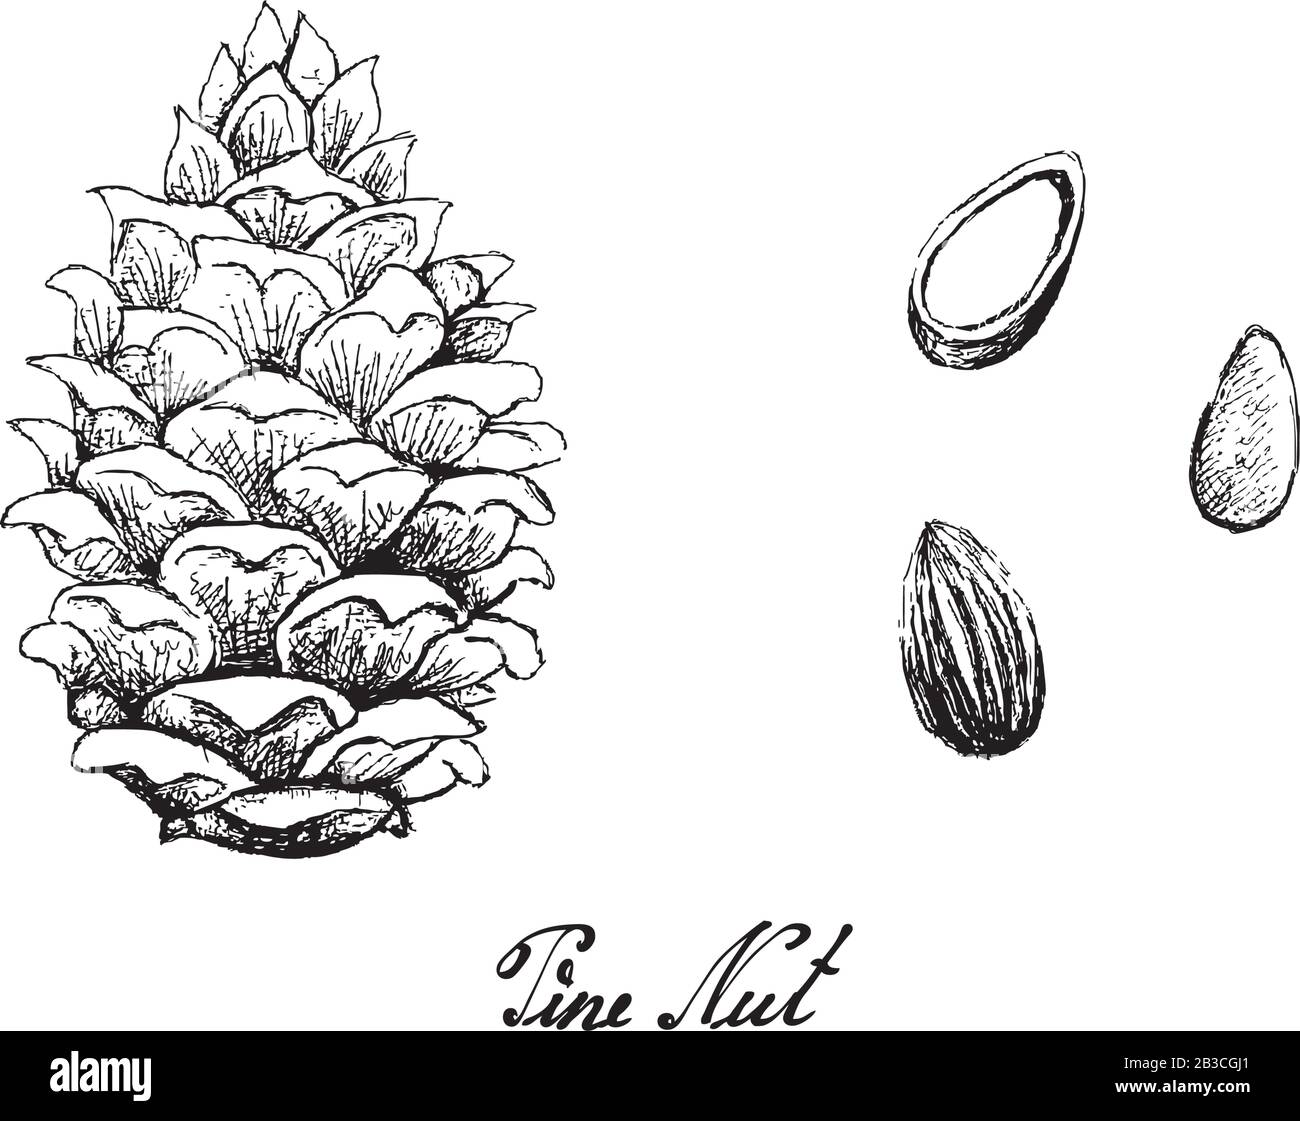 Illustration Hand Drawn Sketch of Pine Cone with Pine Nuts Isolated White Background. Stock Vector